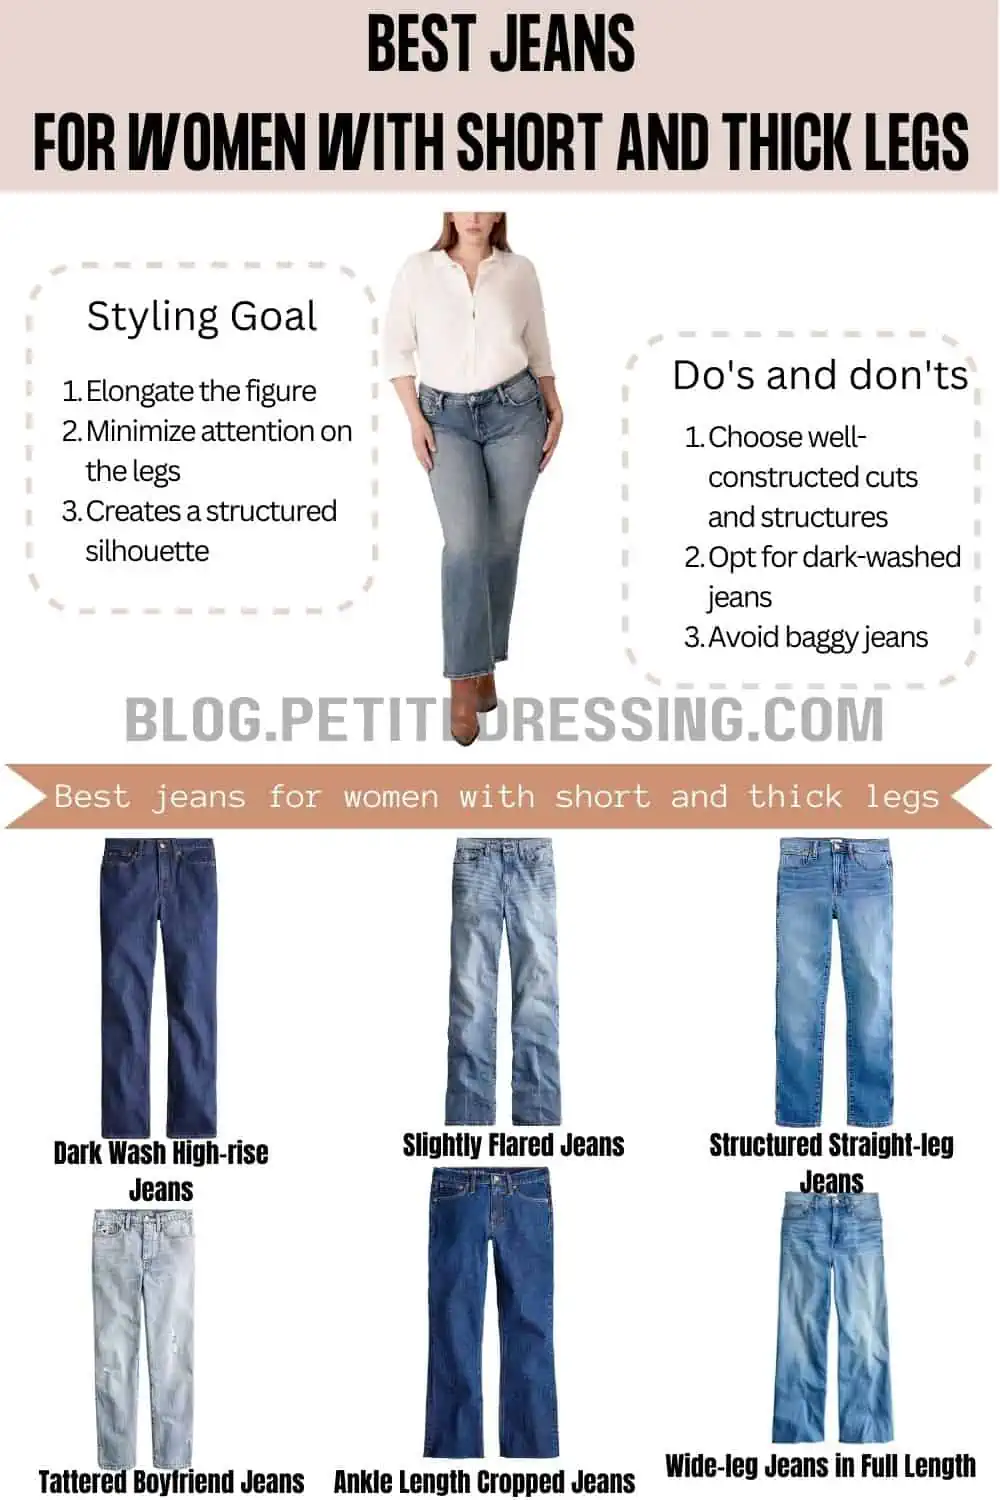 How To Choose The Right Shoes With Wide Leg, Straight, Skinny & Tapered  Pants & Jeans 